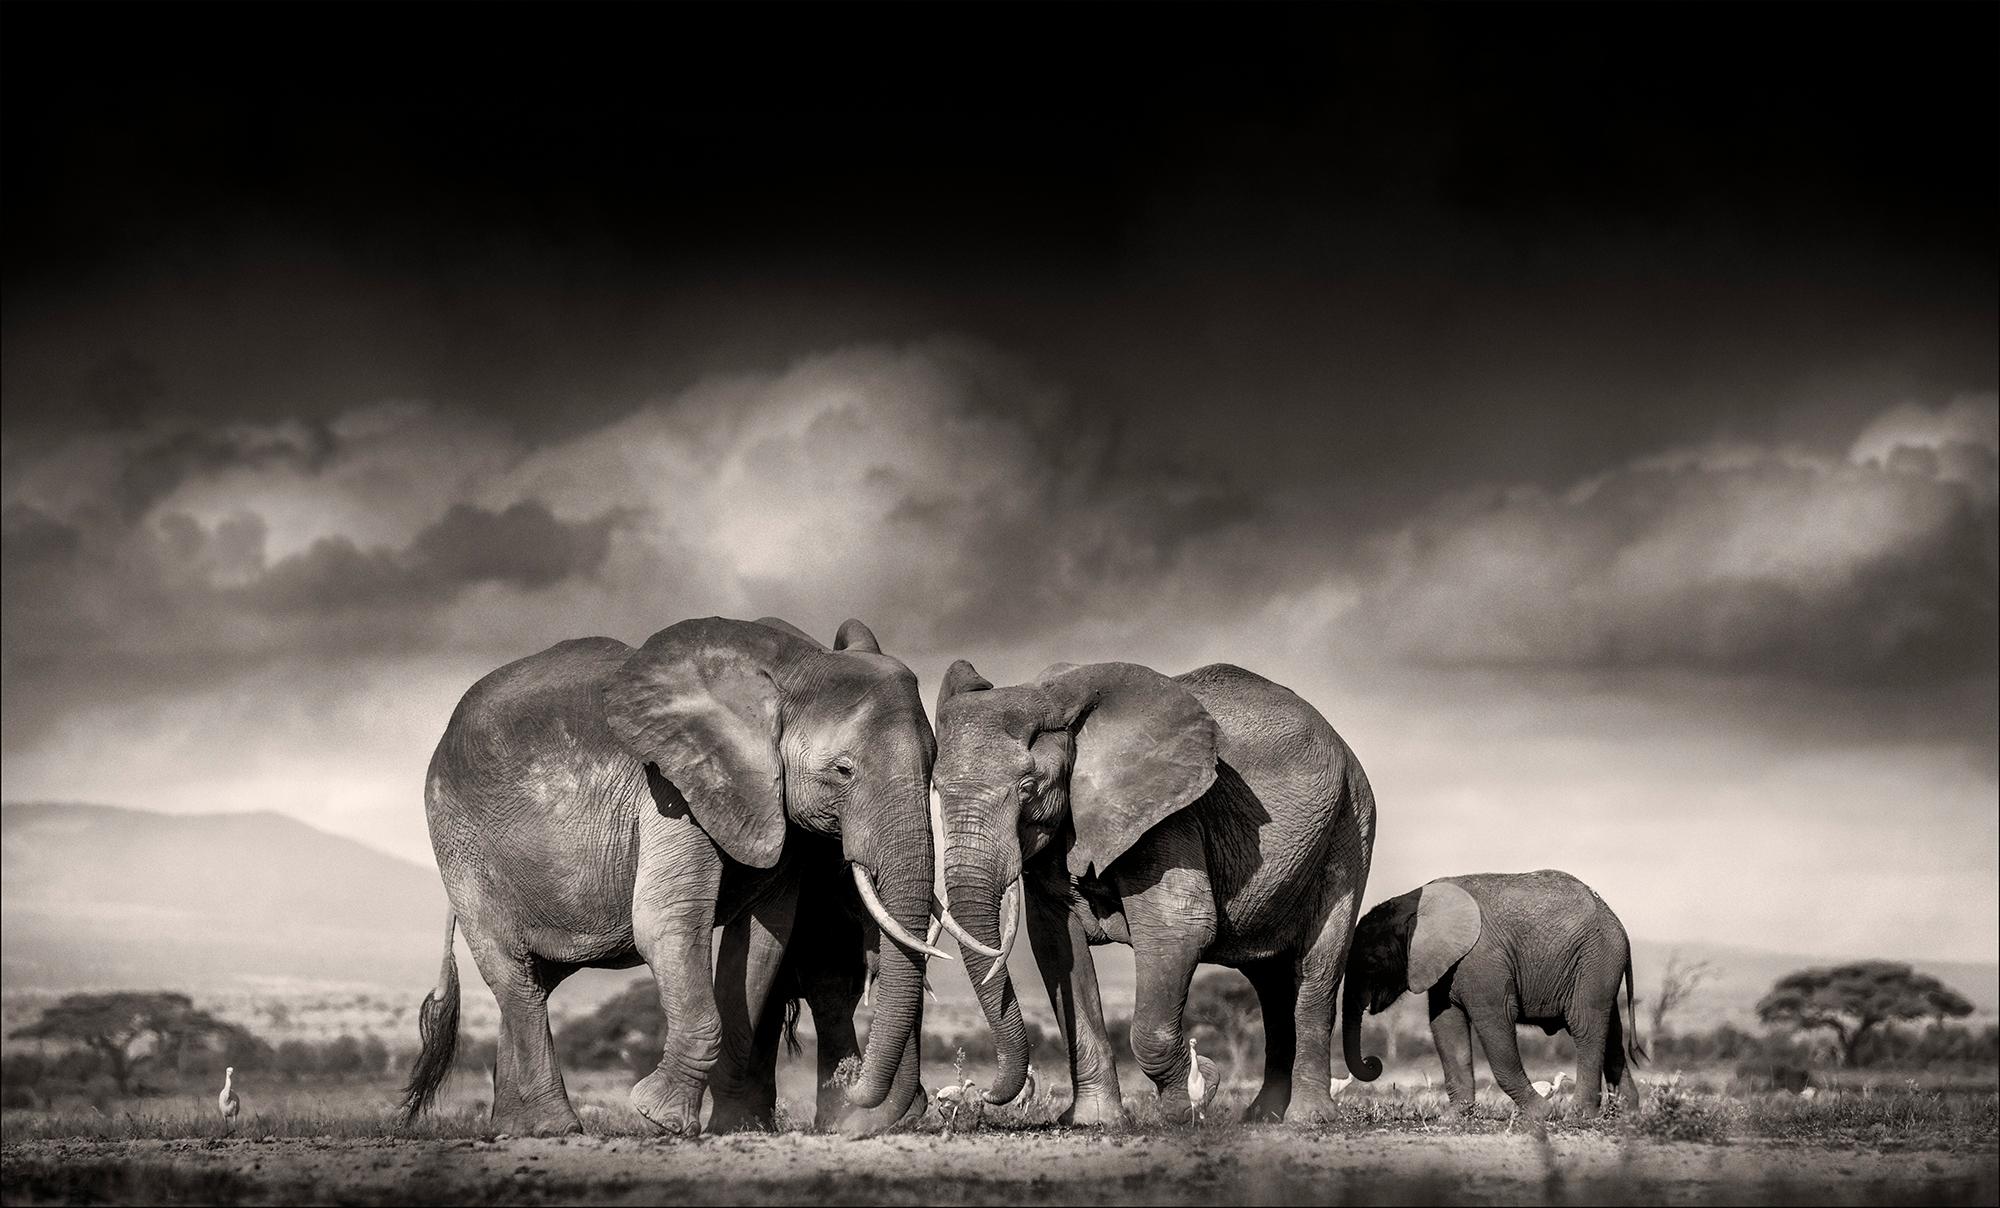 Joachim Schmeisser Black and White Photograph - Searching for salt, animal, wildlife, black and white photography, elephant